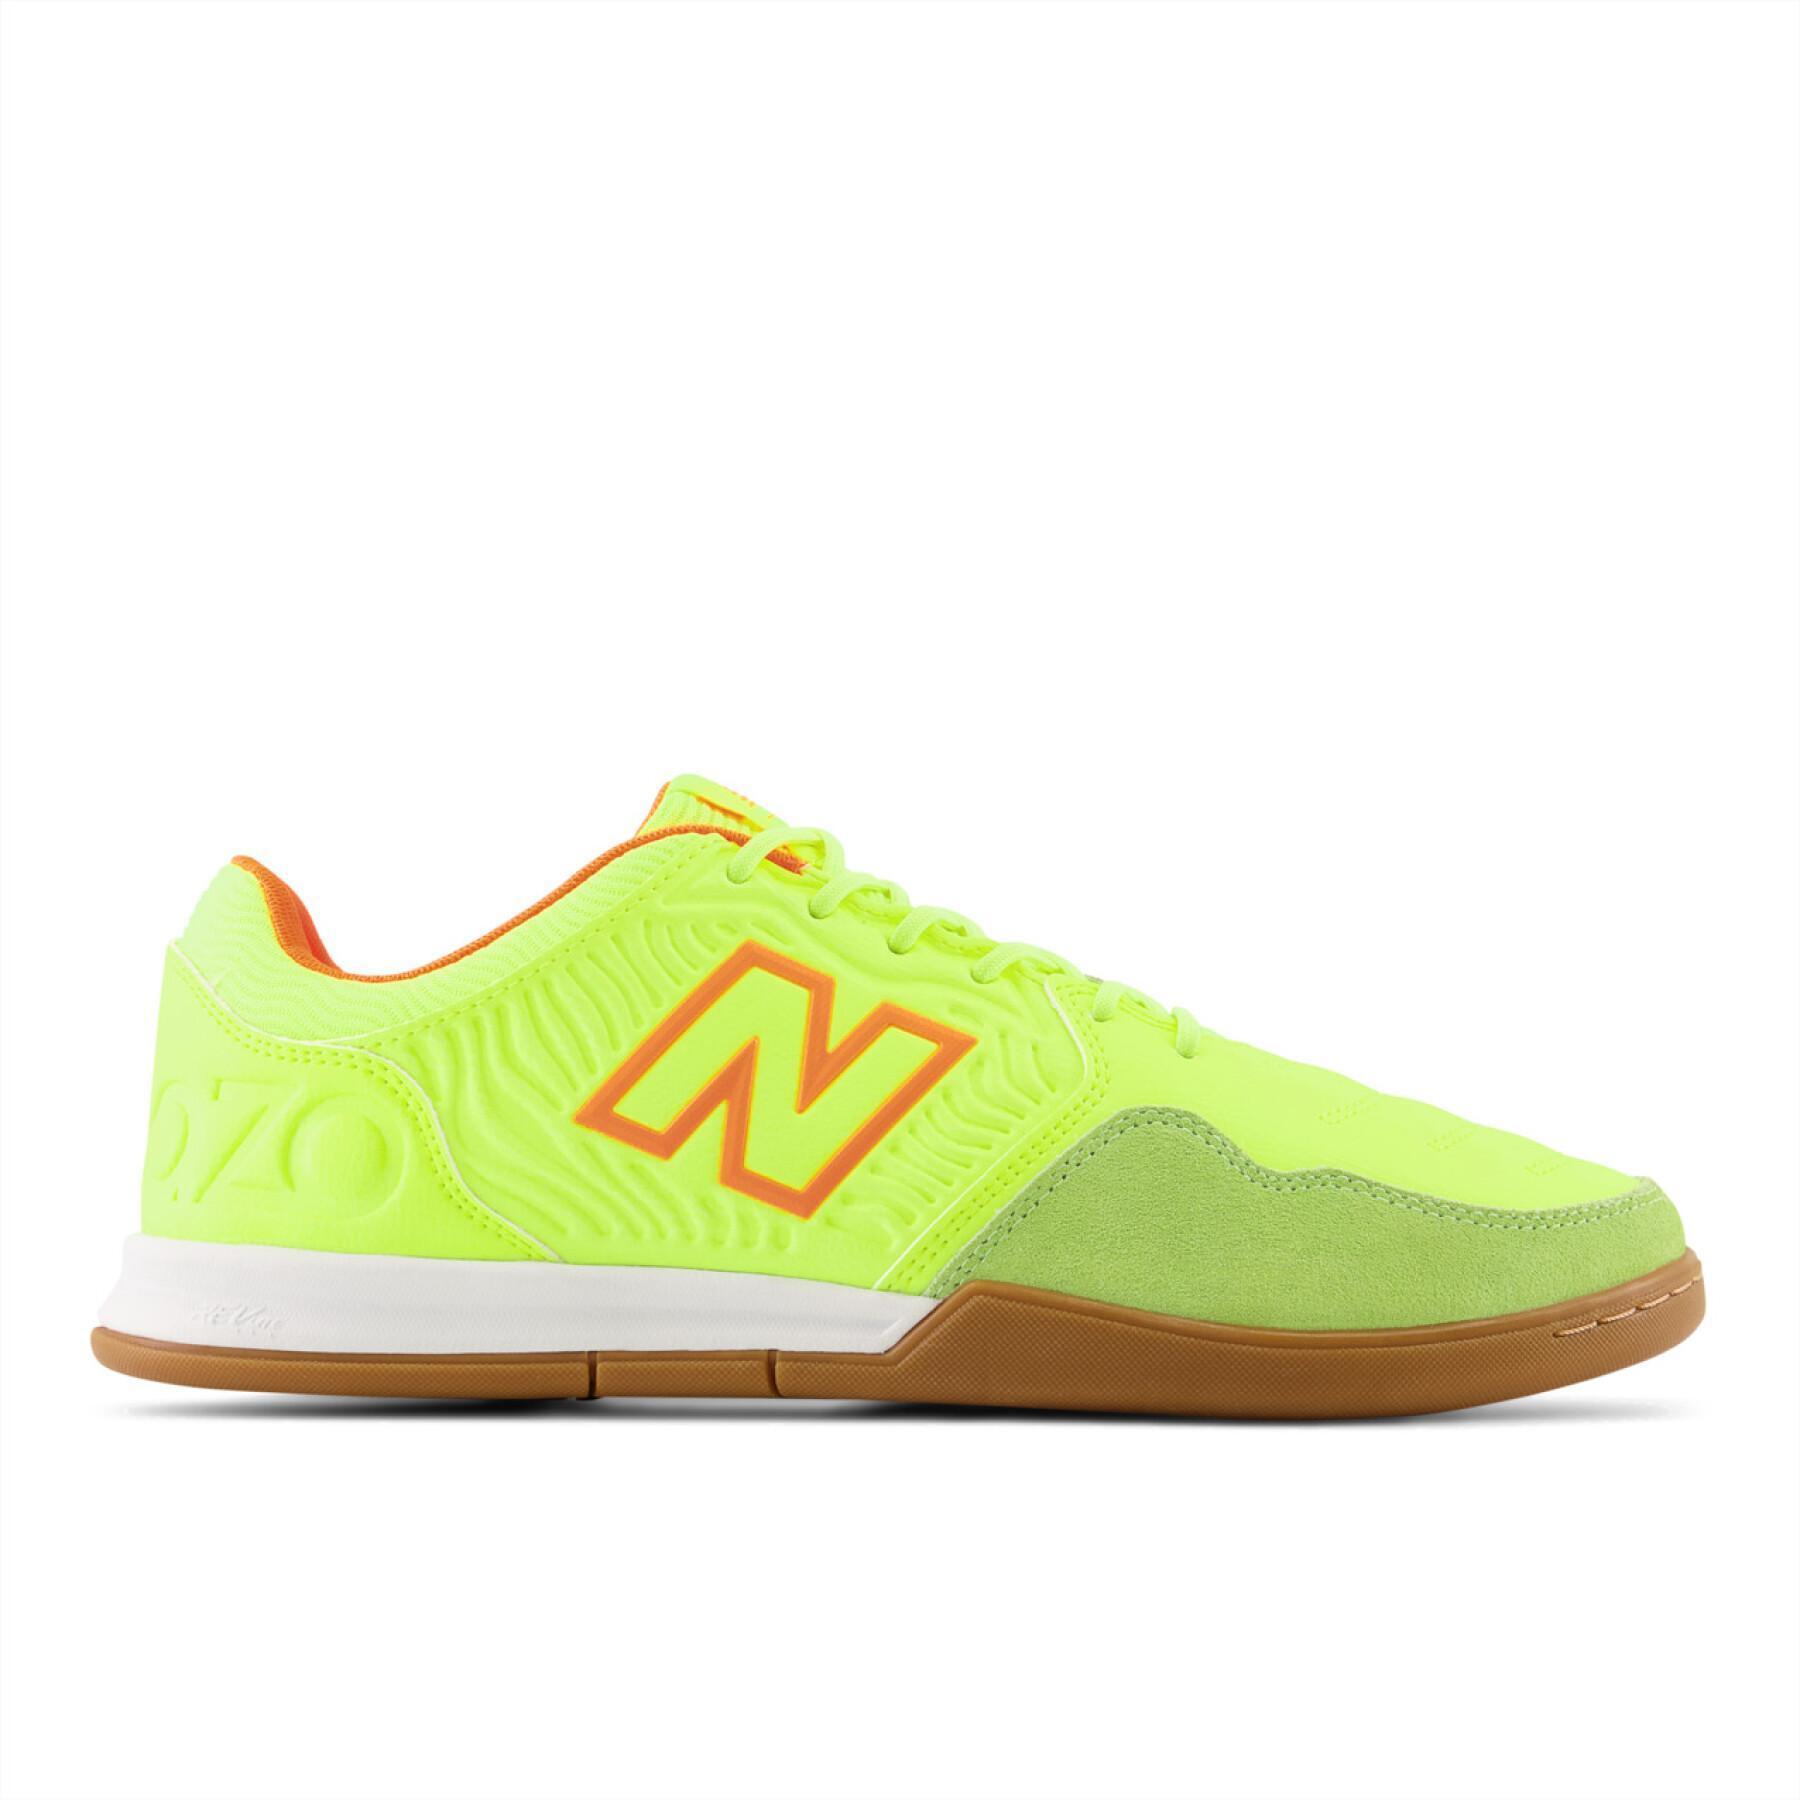 Chaussures de futsal New Balance Audazo v5+ Command IN